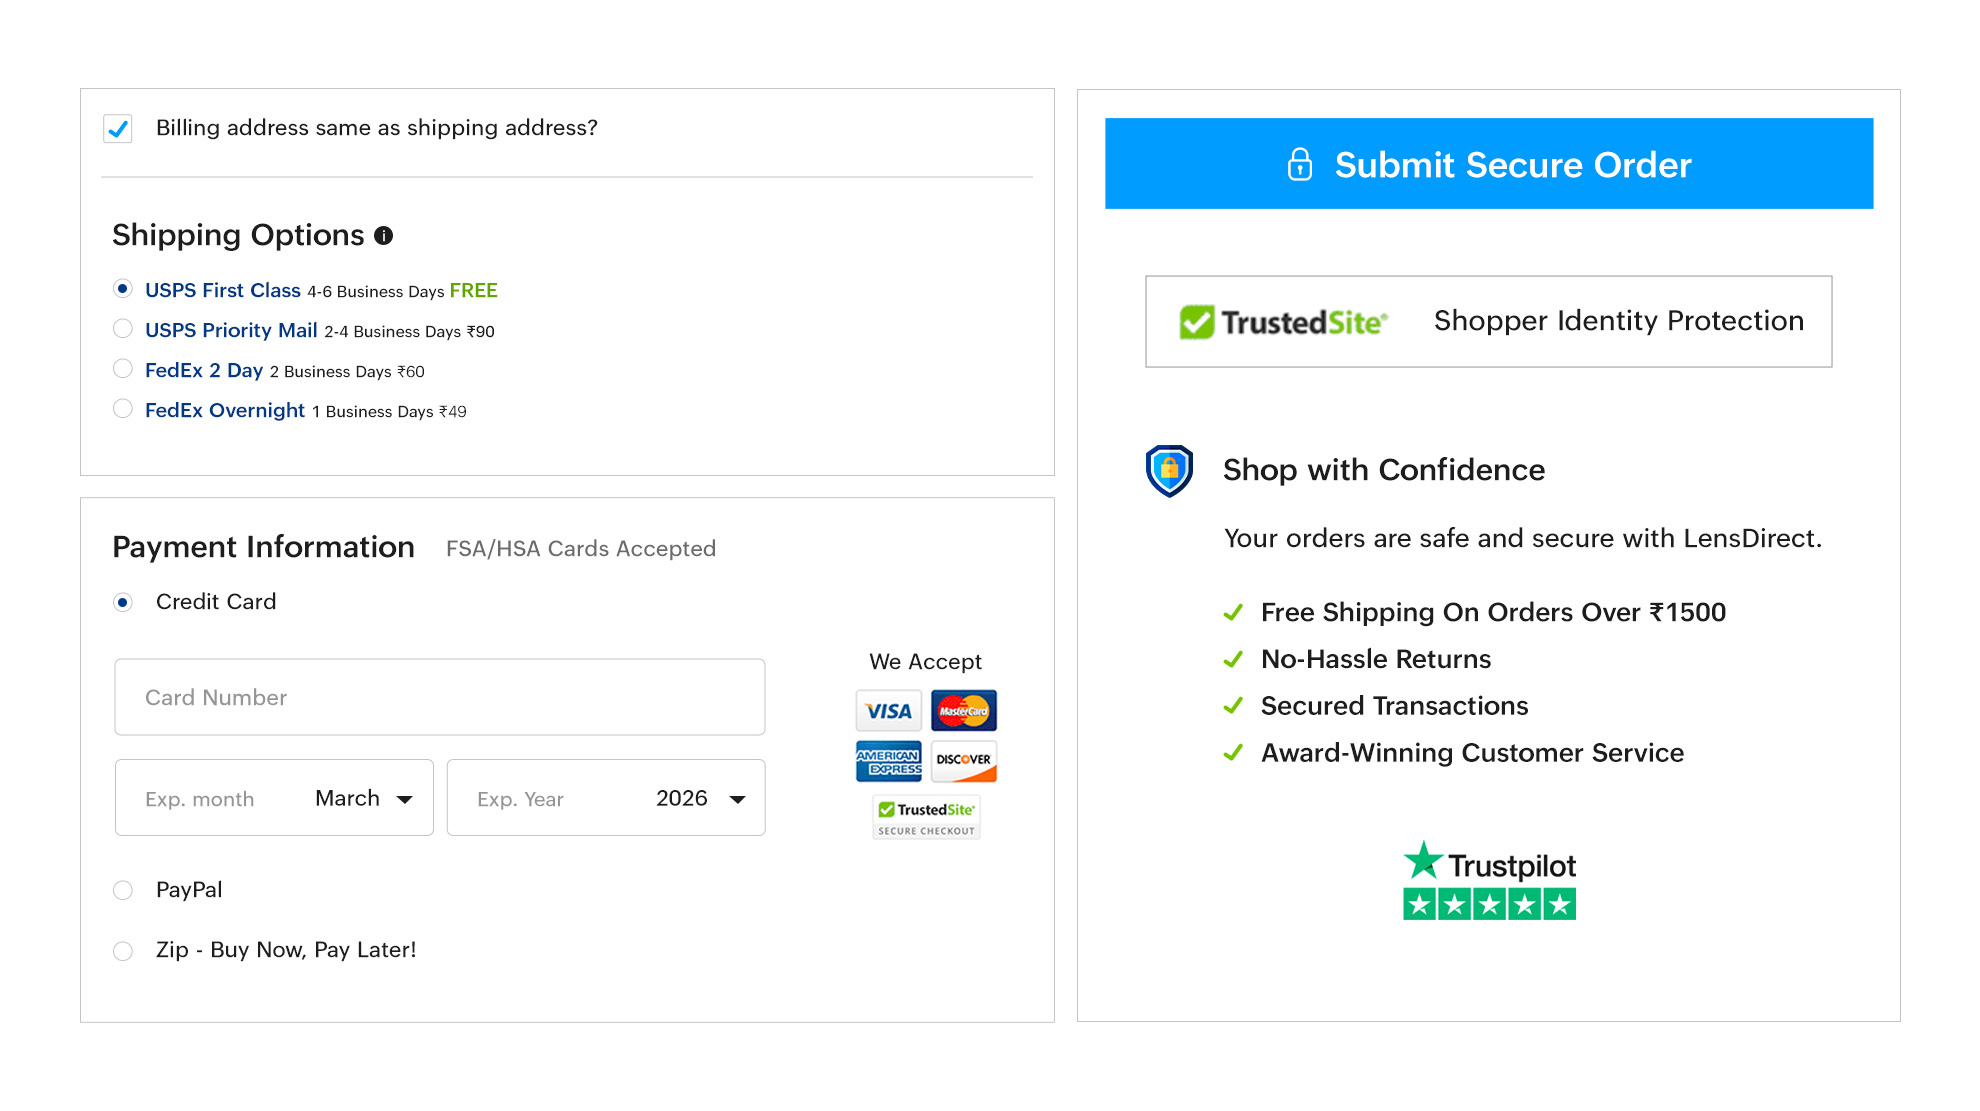 Add security badges to build credibility during checkout process